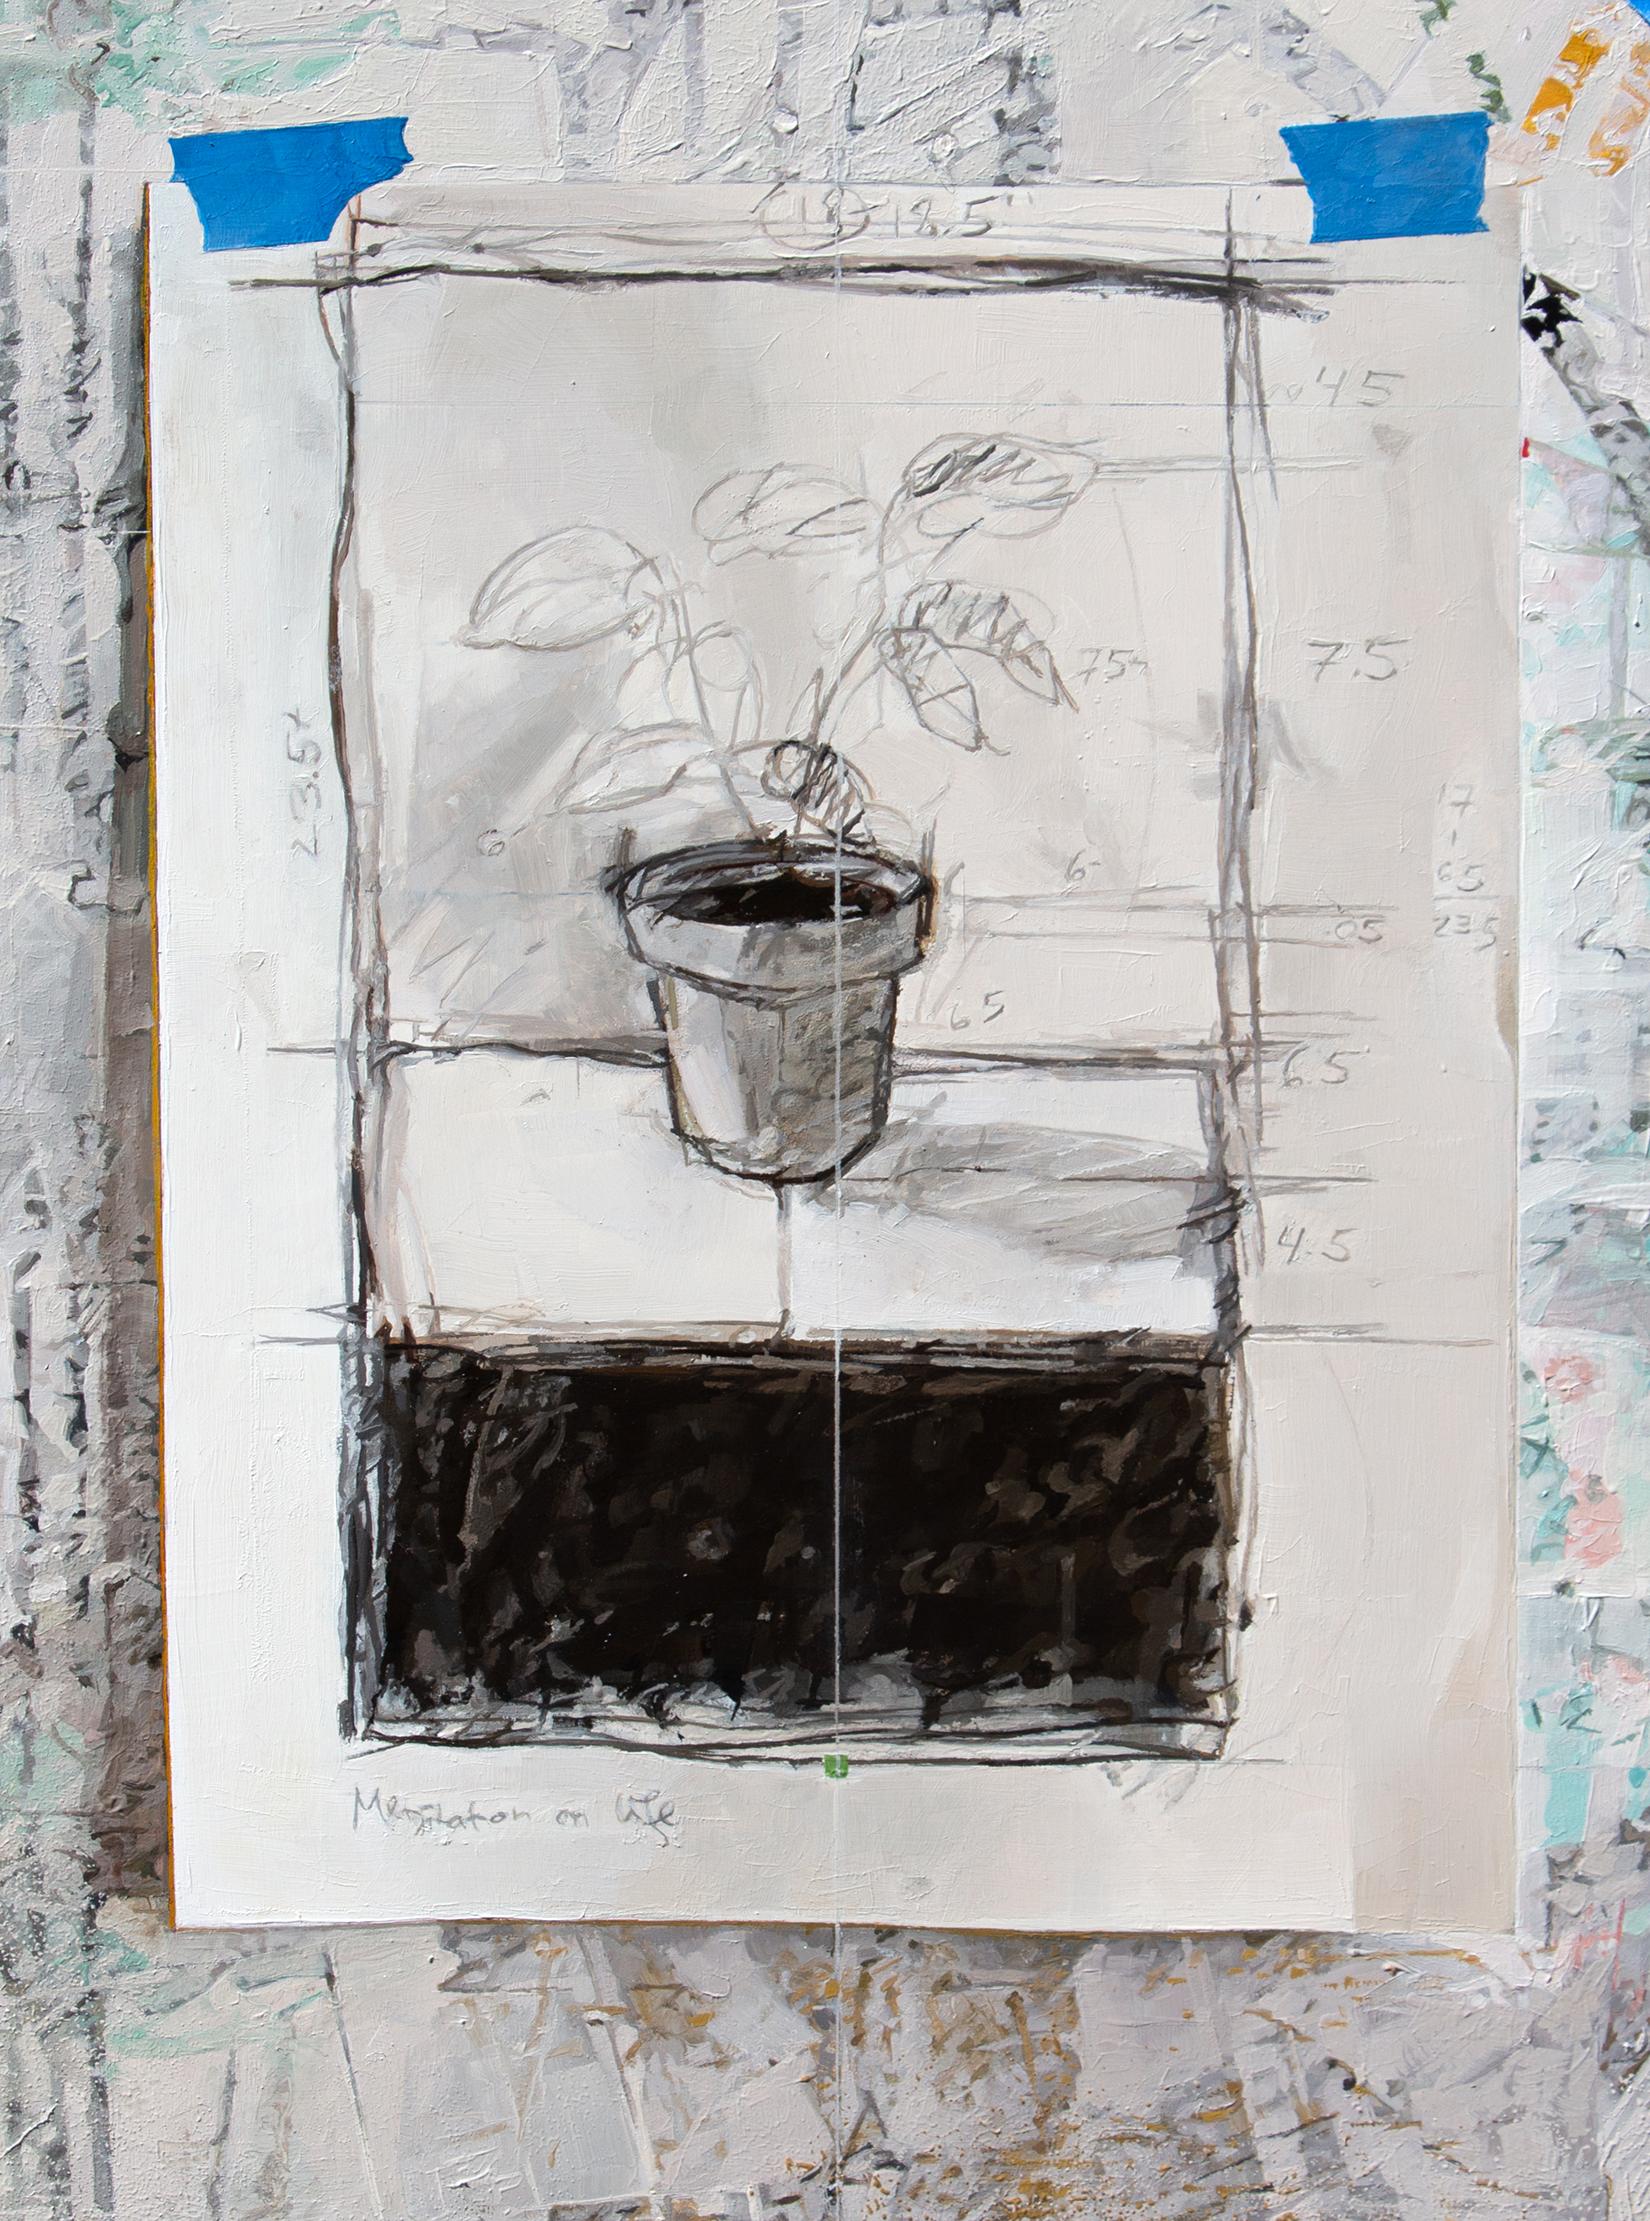 In this quiet still life painting, a drawing on paper of a sketched plant in a simple pot is taped with blue tape to a white wall with gray marks, while a plumb bob, an artist's tool used as a guide for vertical lines, hangs like a pendulum in front